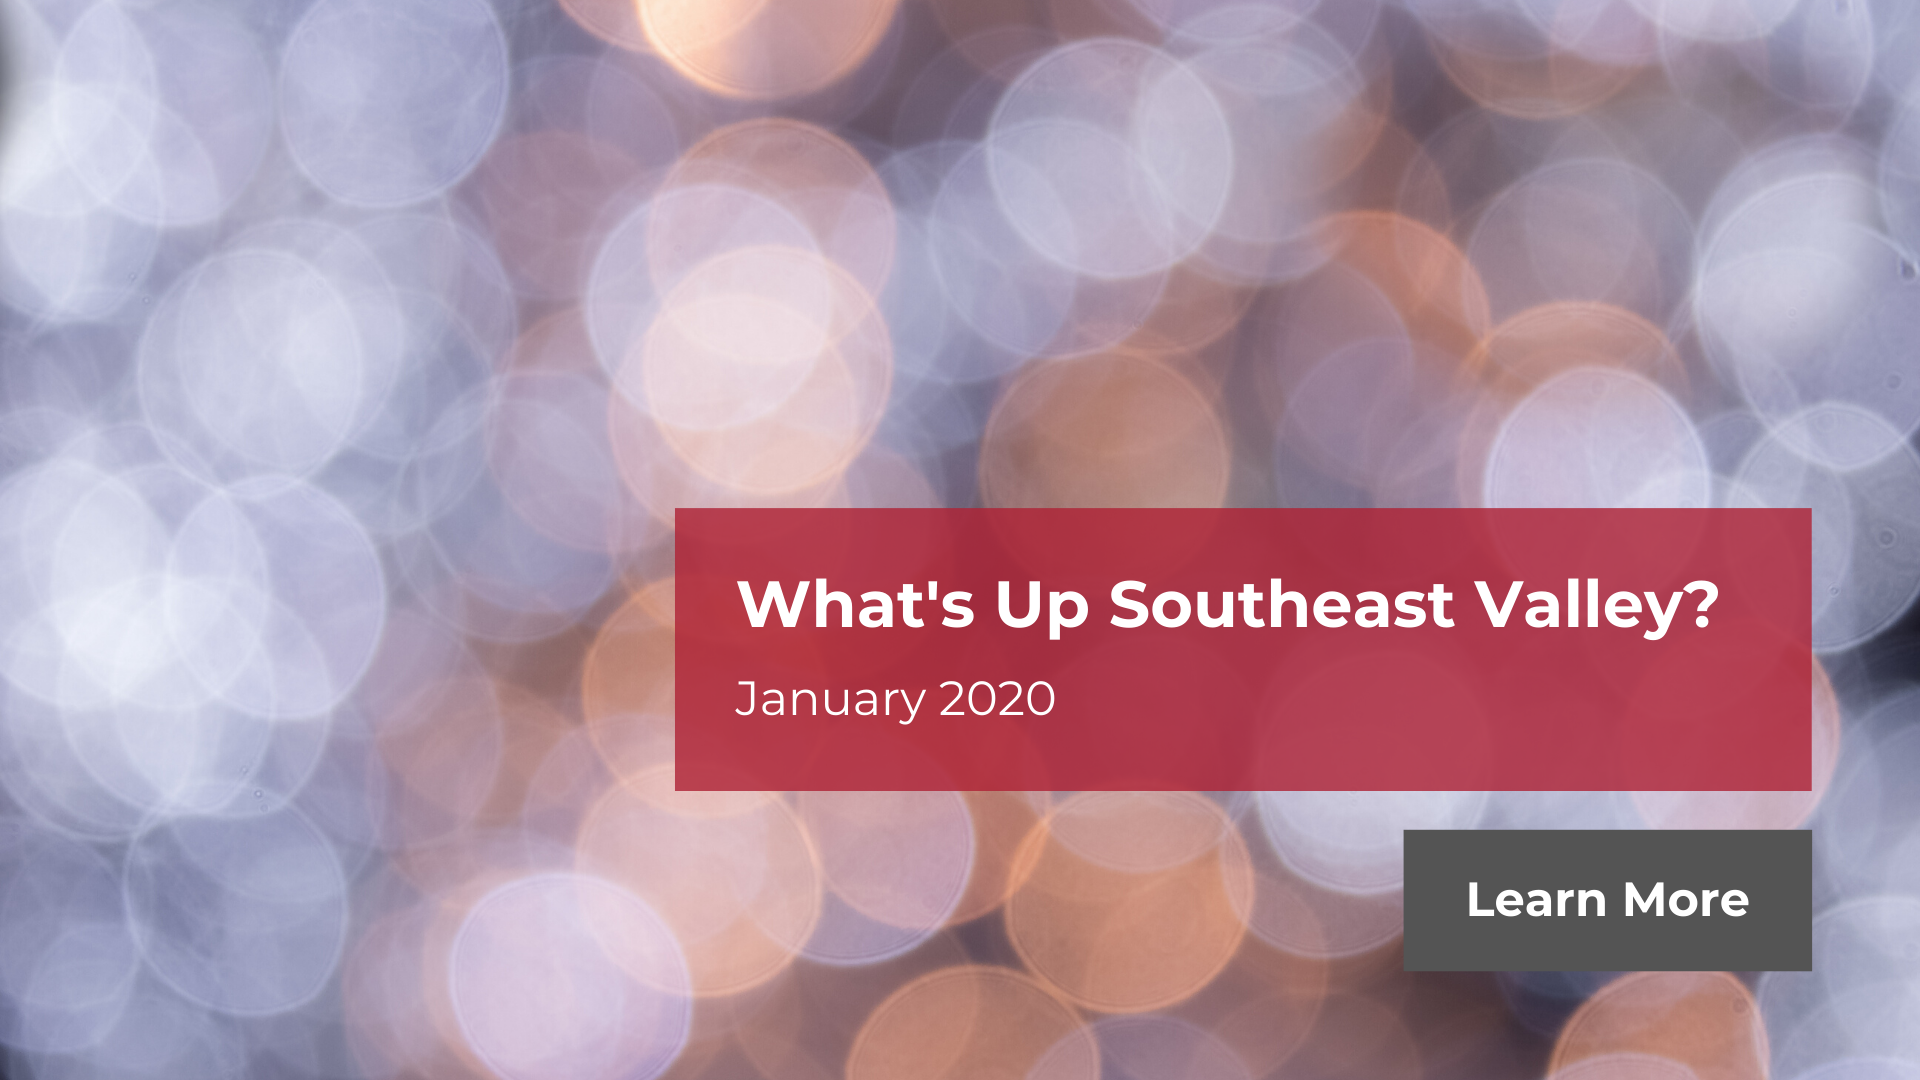 What's Up Southeast Valley? January 2020